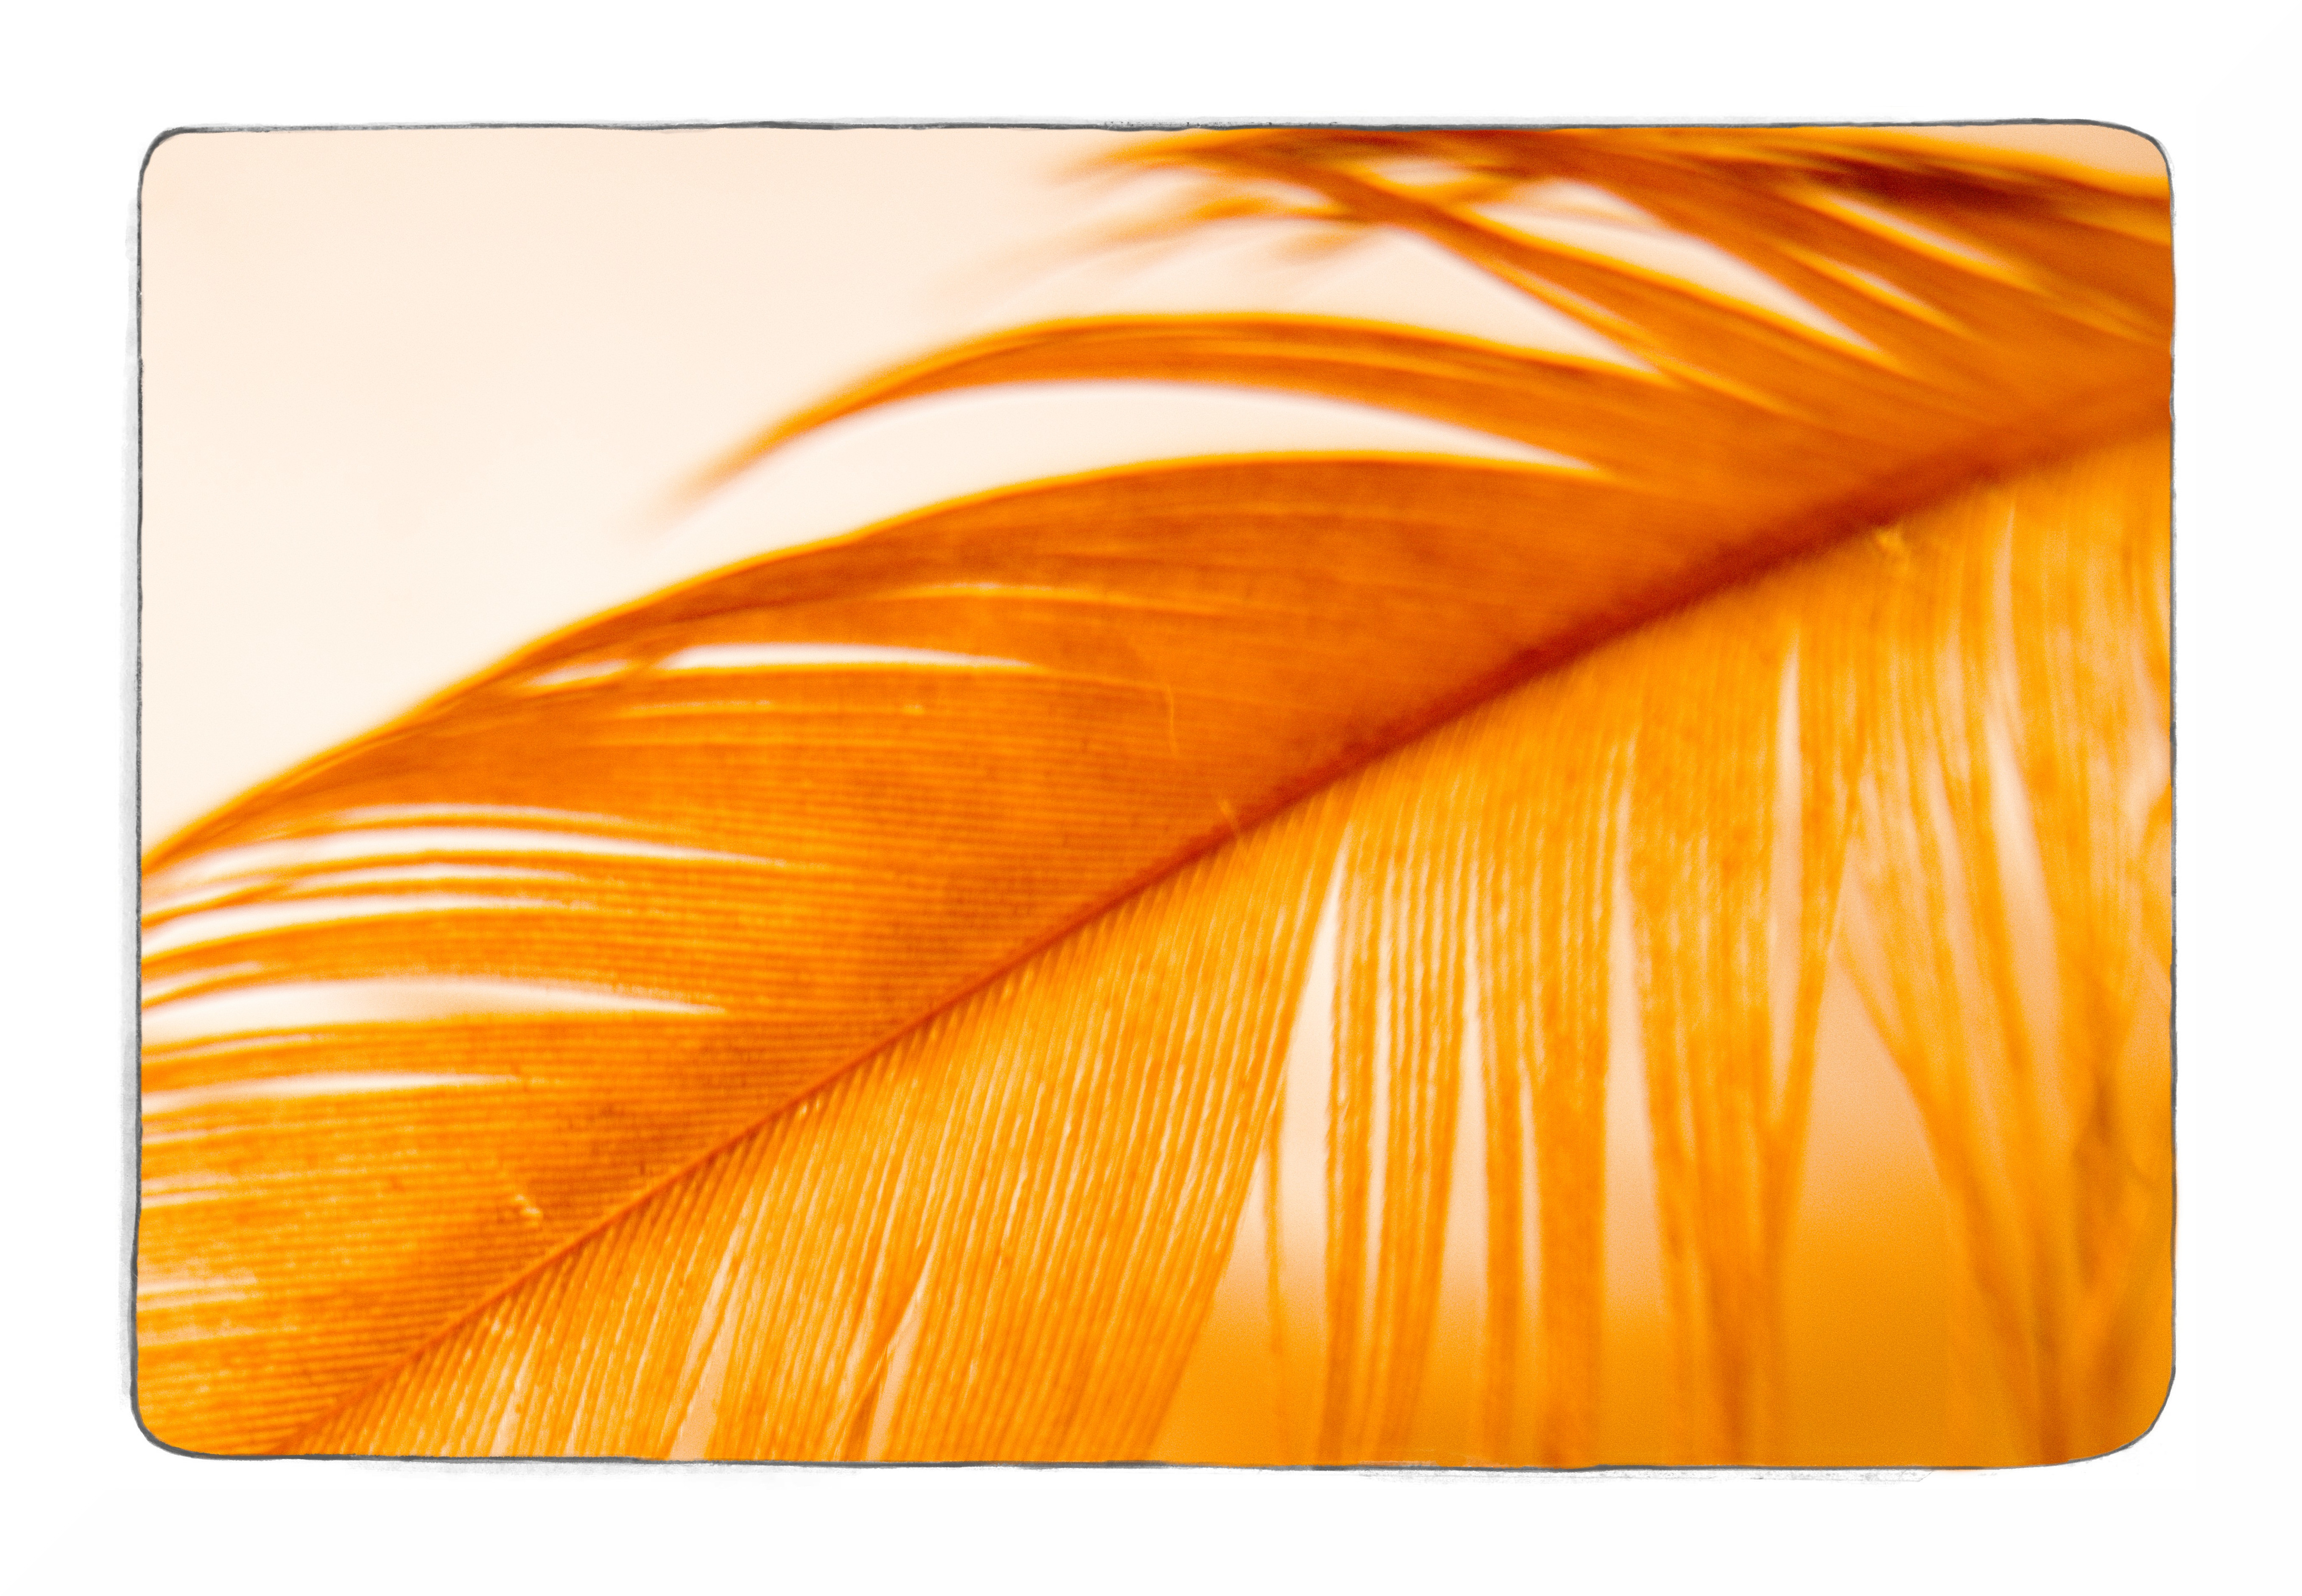 A feather in orange